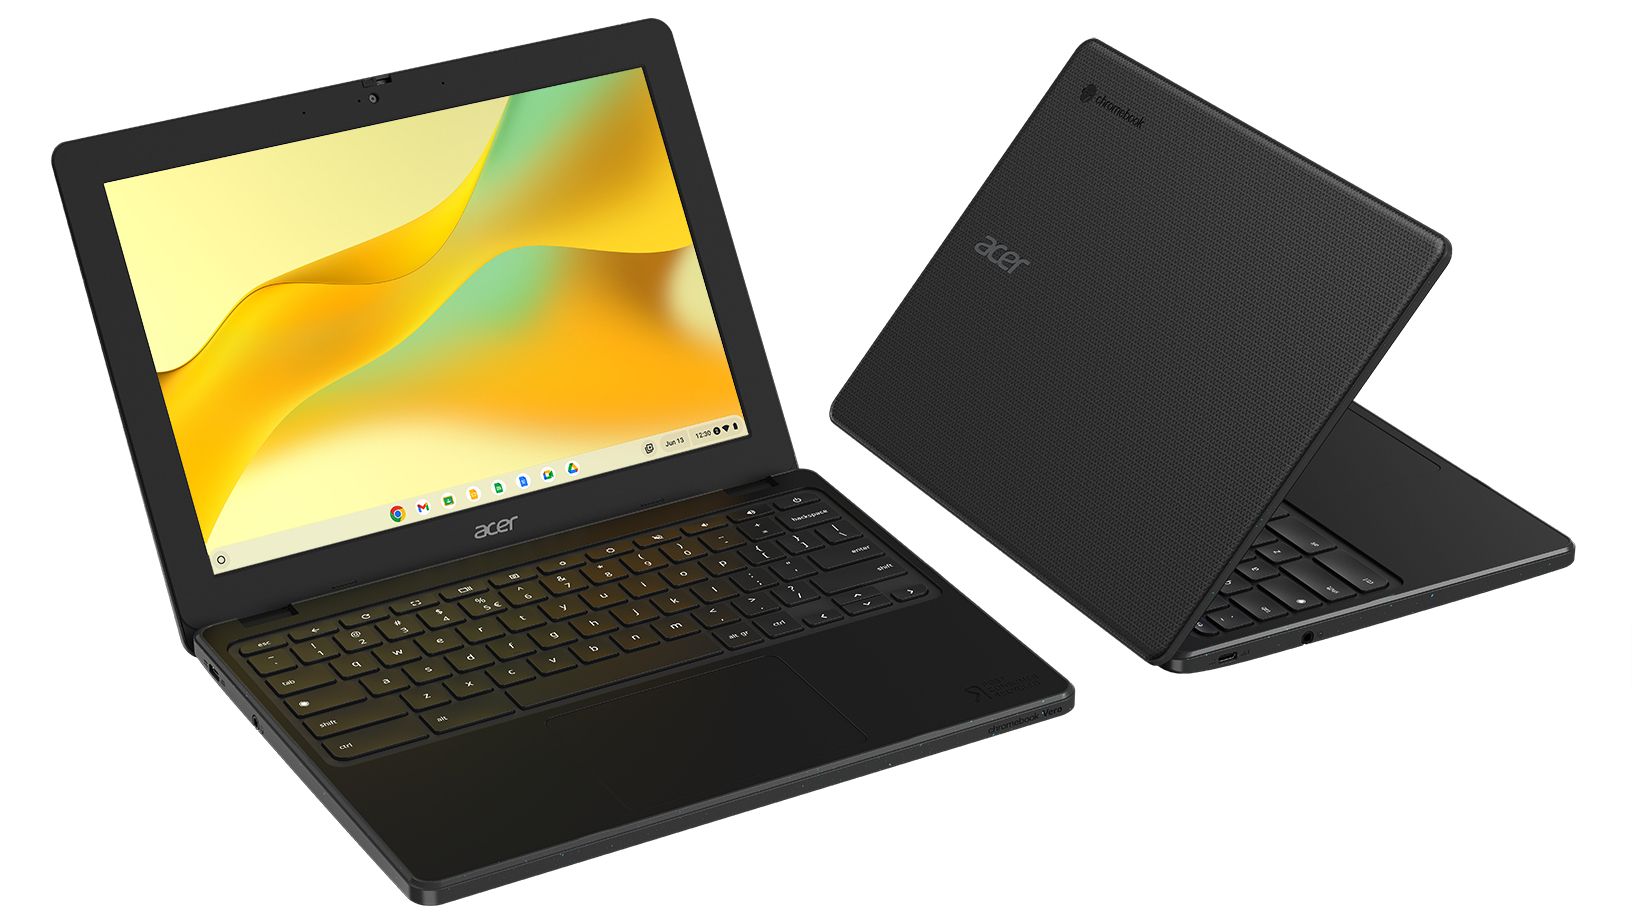 Acer brings its eco-friendly Vero Chromebook model to a brand new market